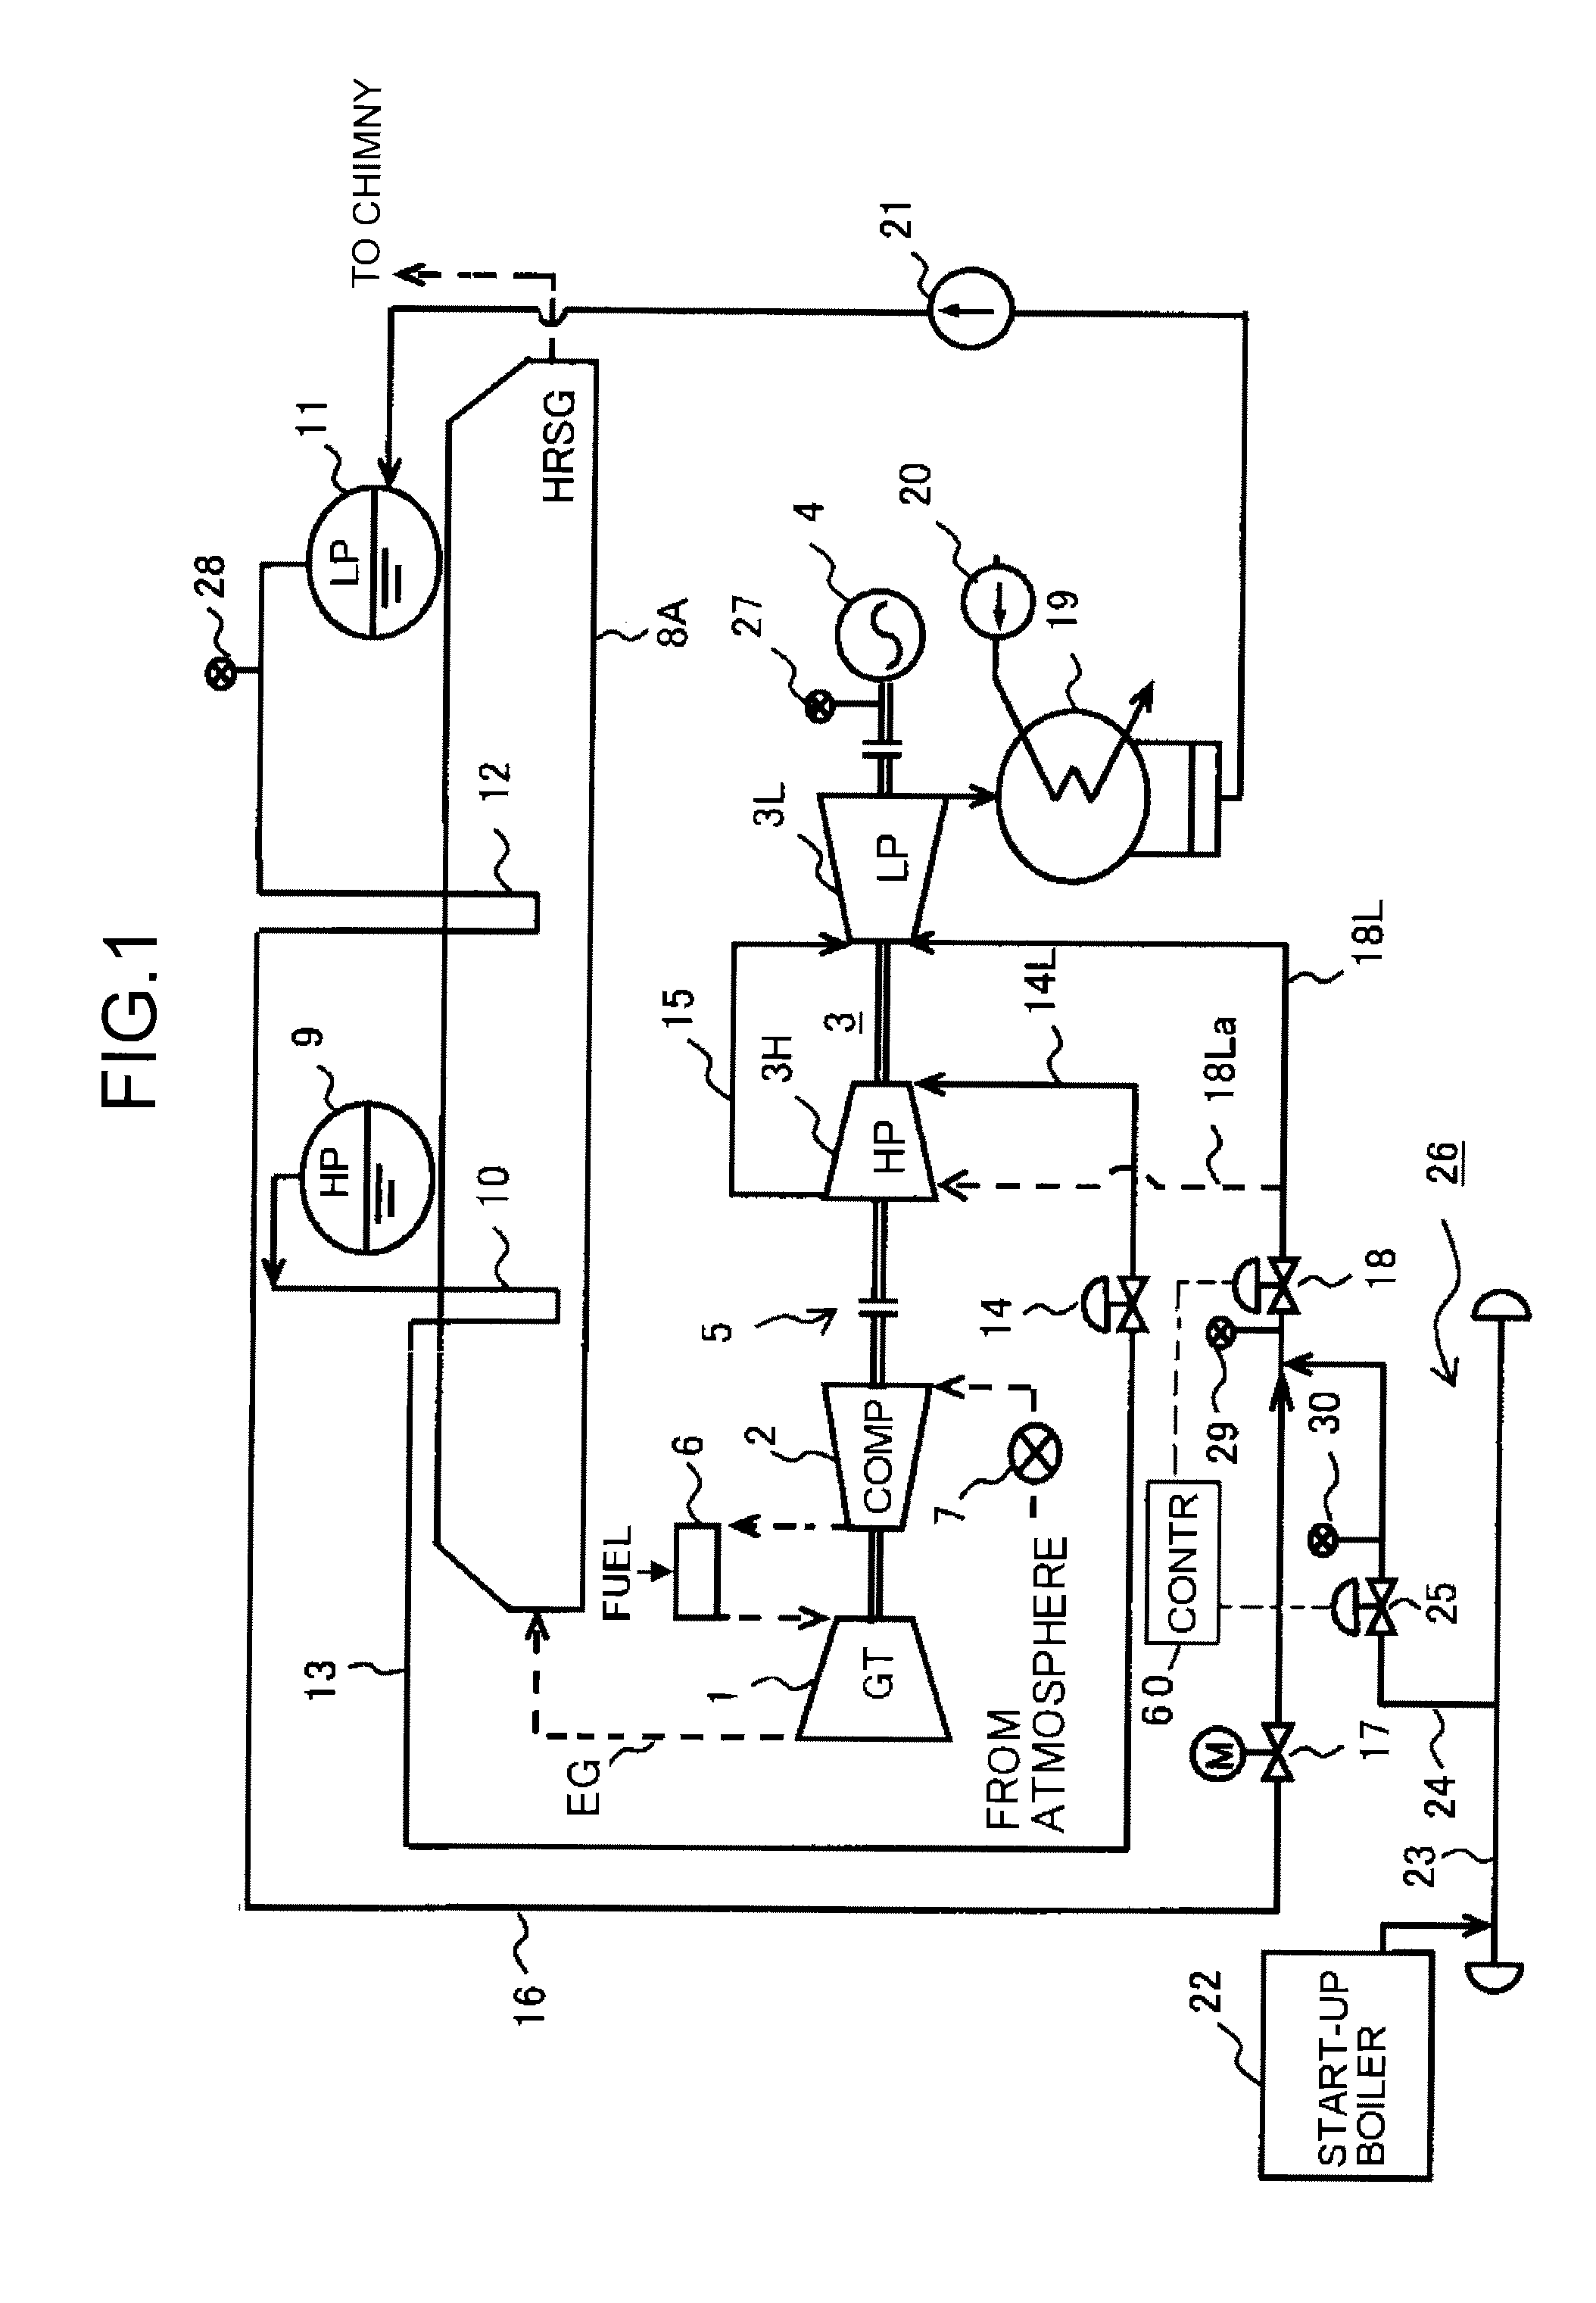 Single shaft combined cycle power plant start-up method an single shaft combined cycle power plant